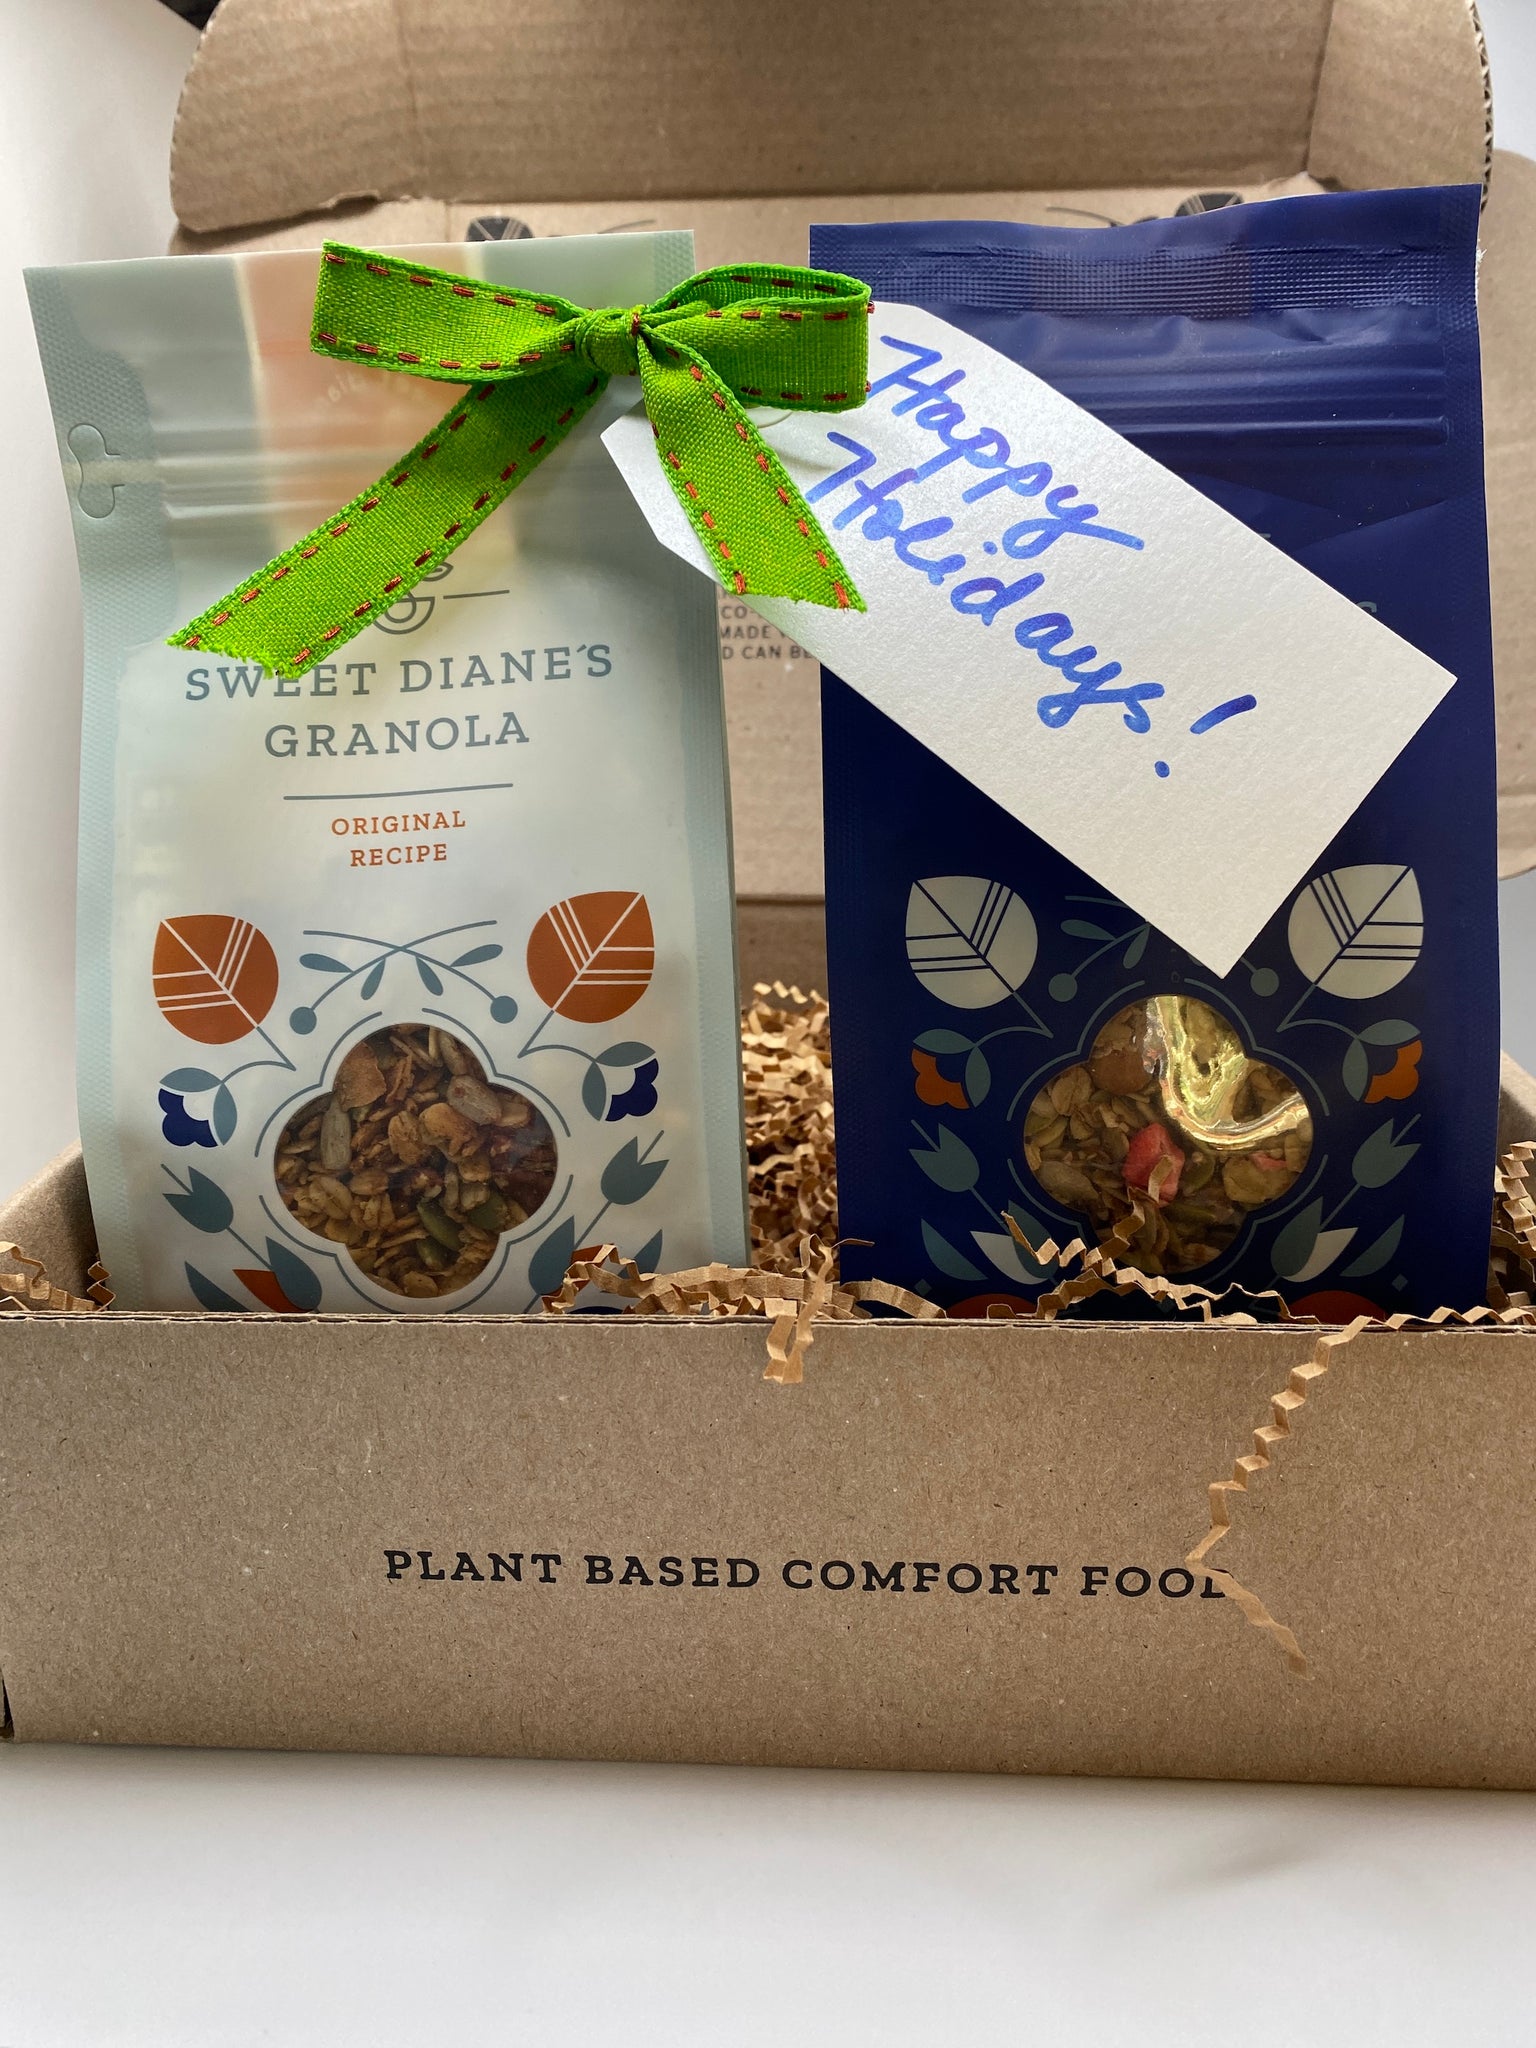 Give Some Granola Cheer this Year!